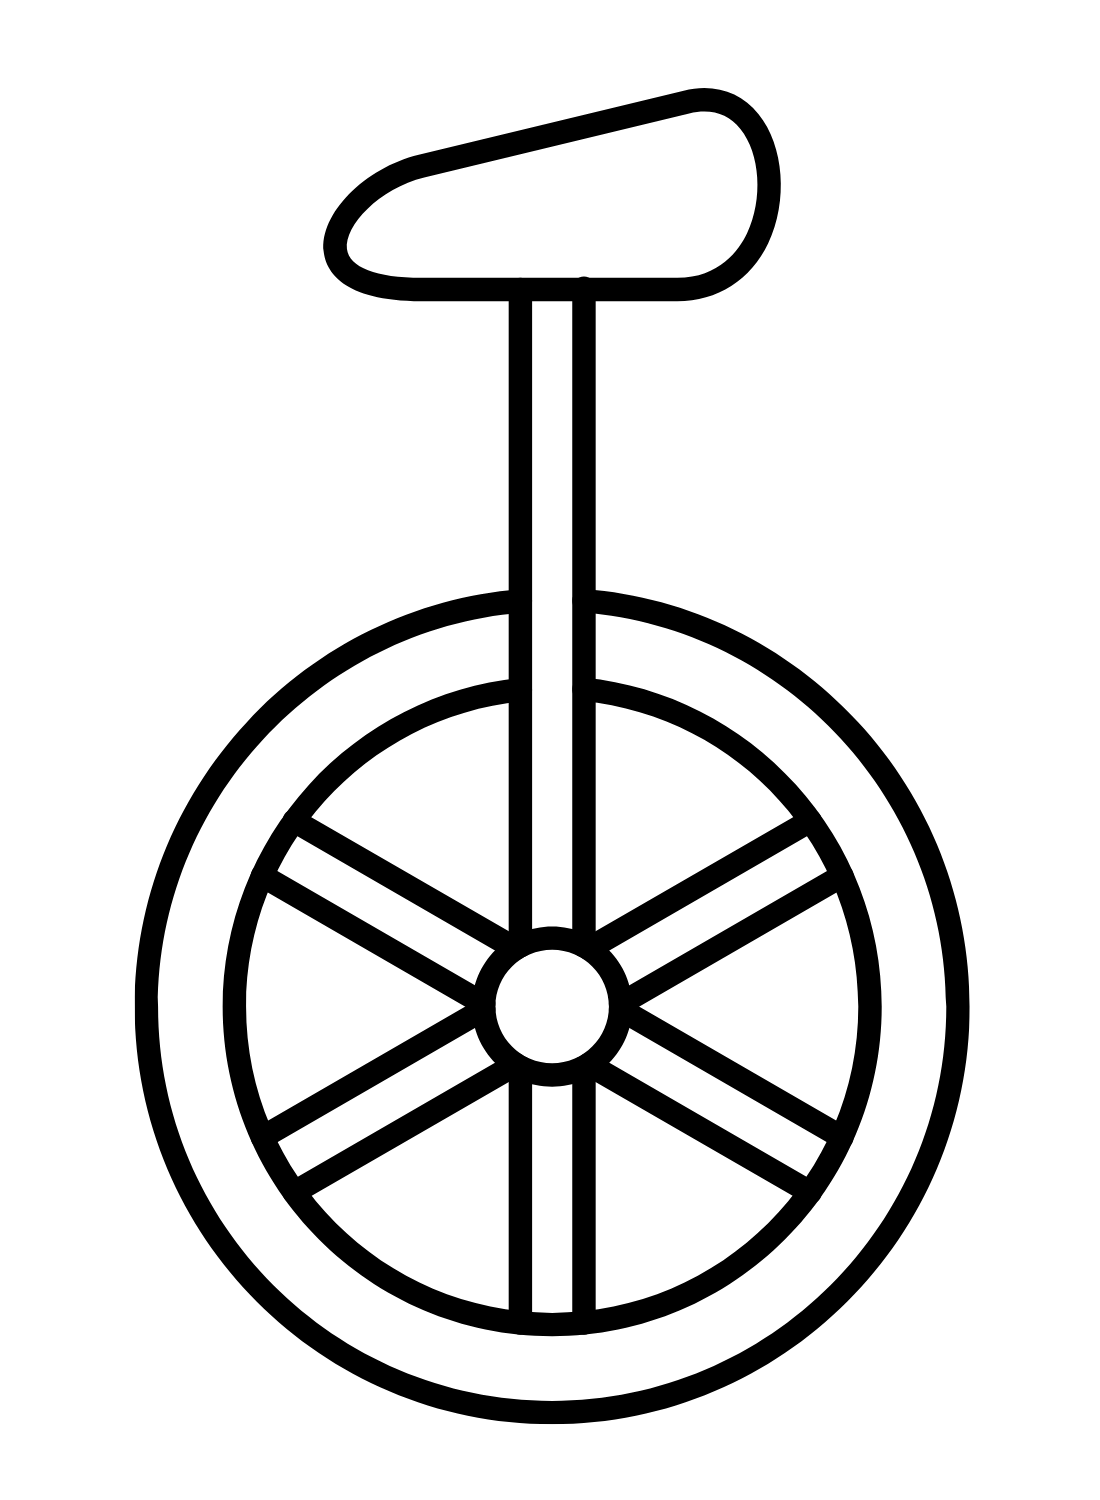 Draw Easy Bicycle Coloring Page